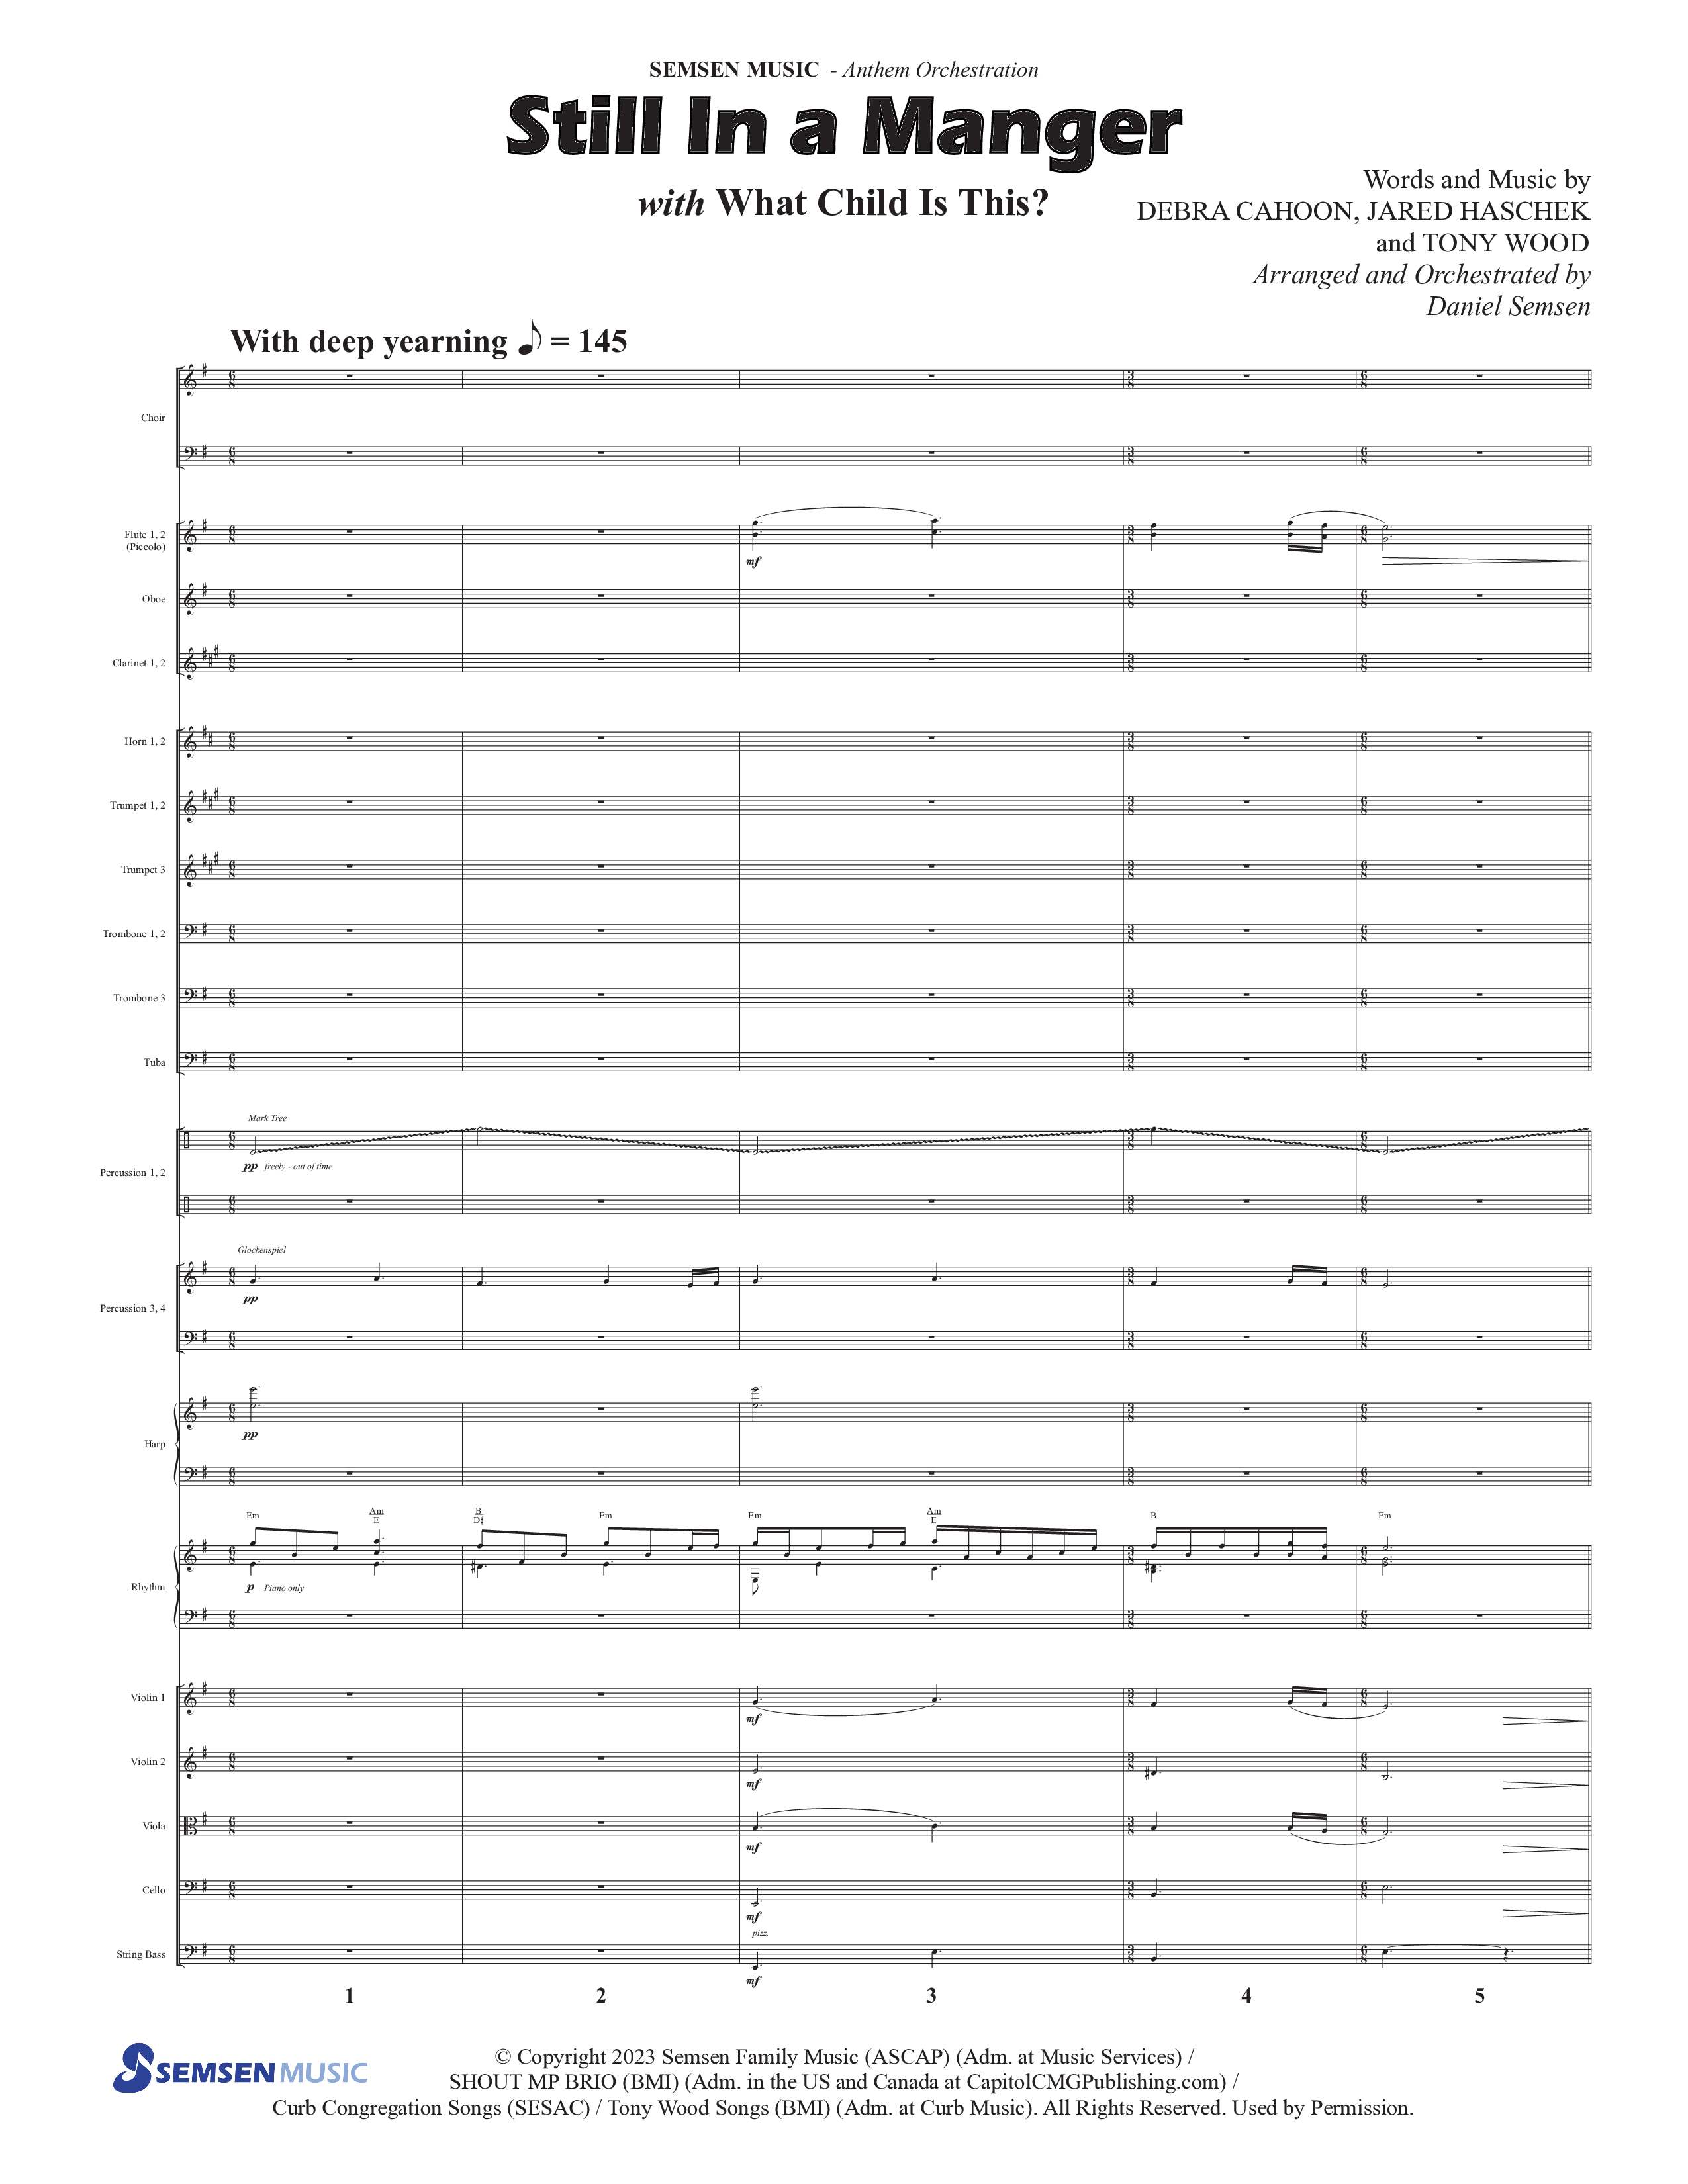 Still In A Manger with What Child Is This (Choral Anthem SATB) Orchestration (Semsen Music / Arr. Daniel Semsen)